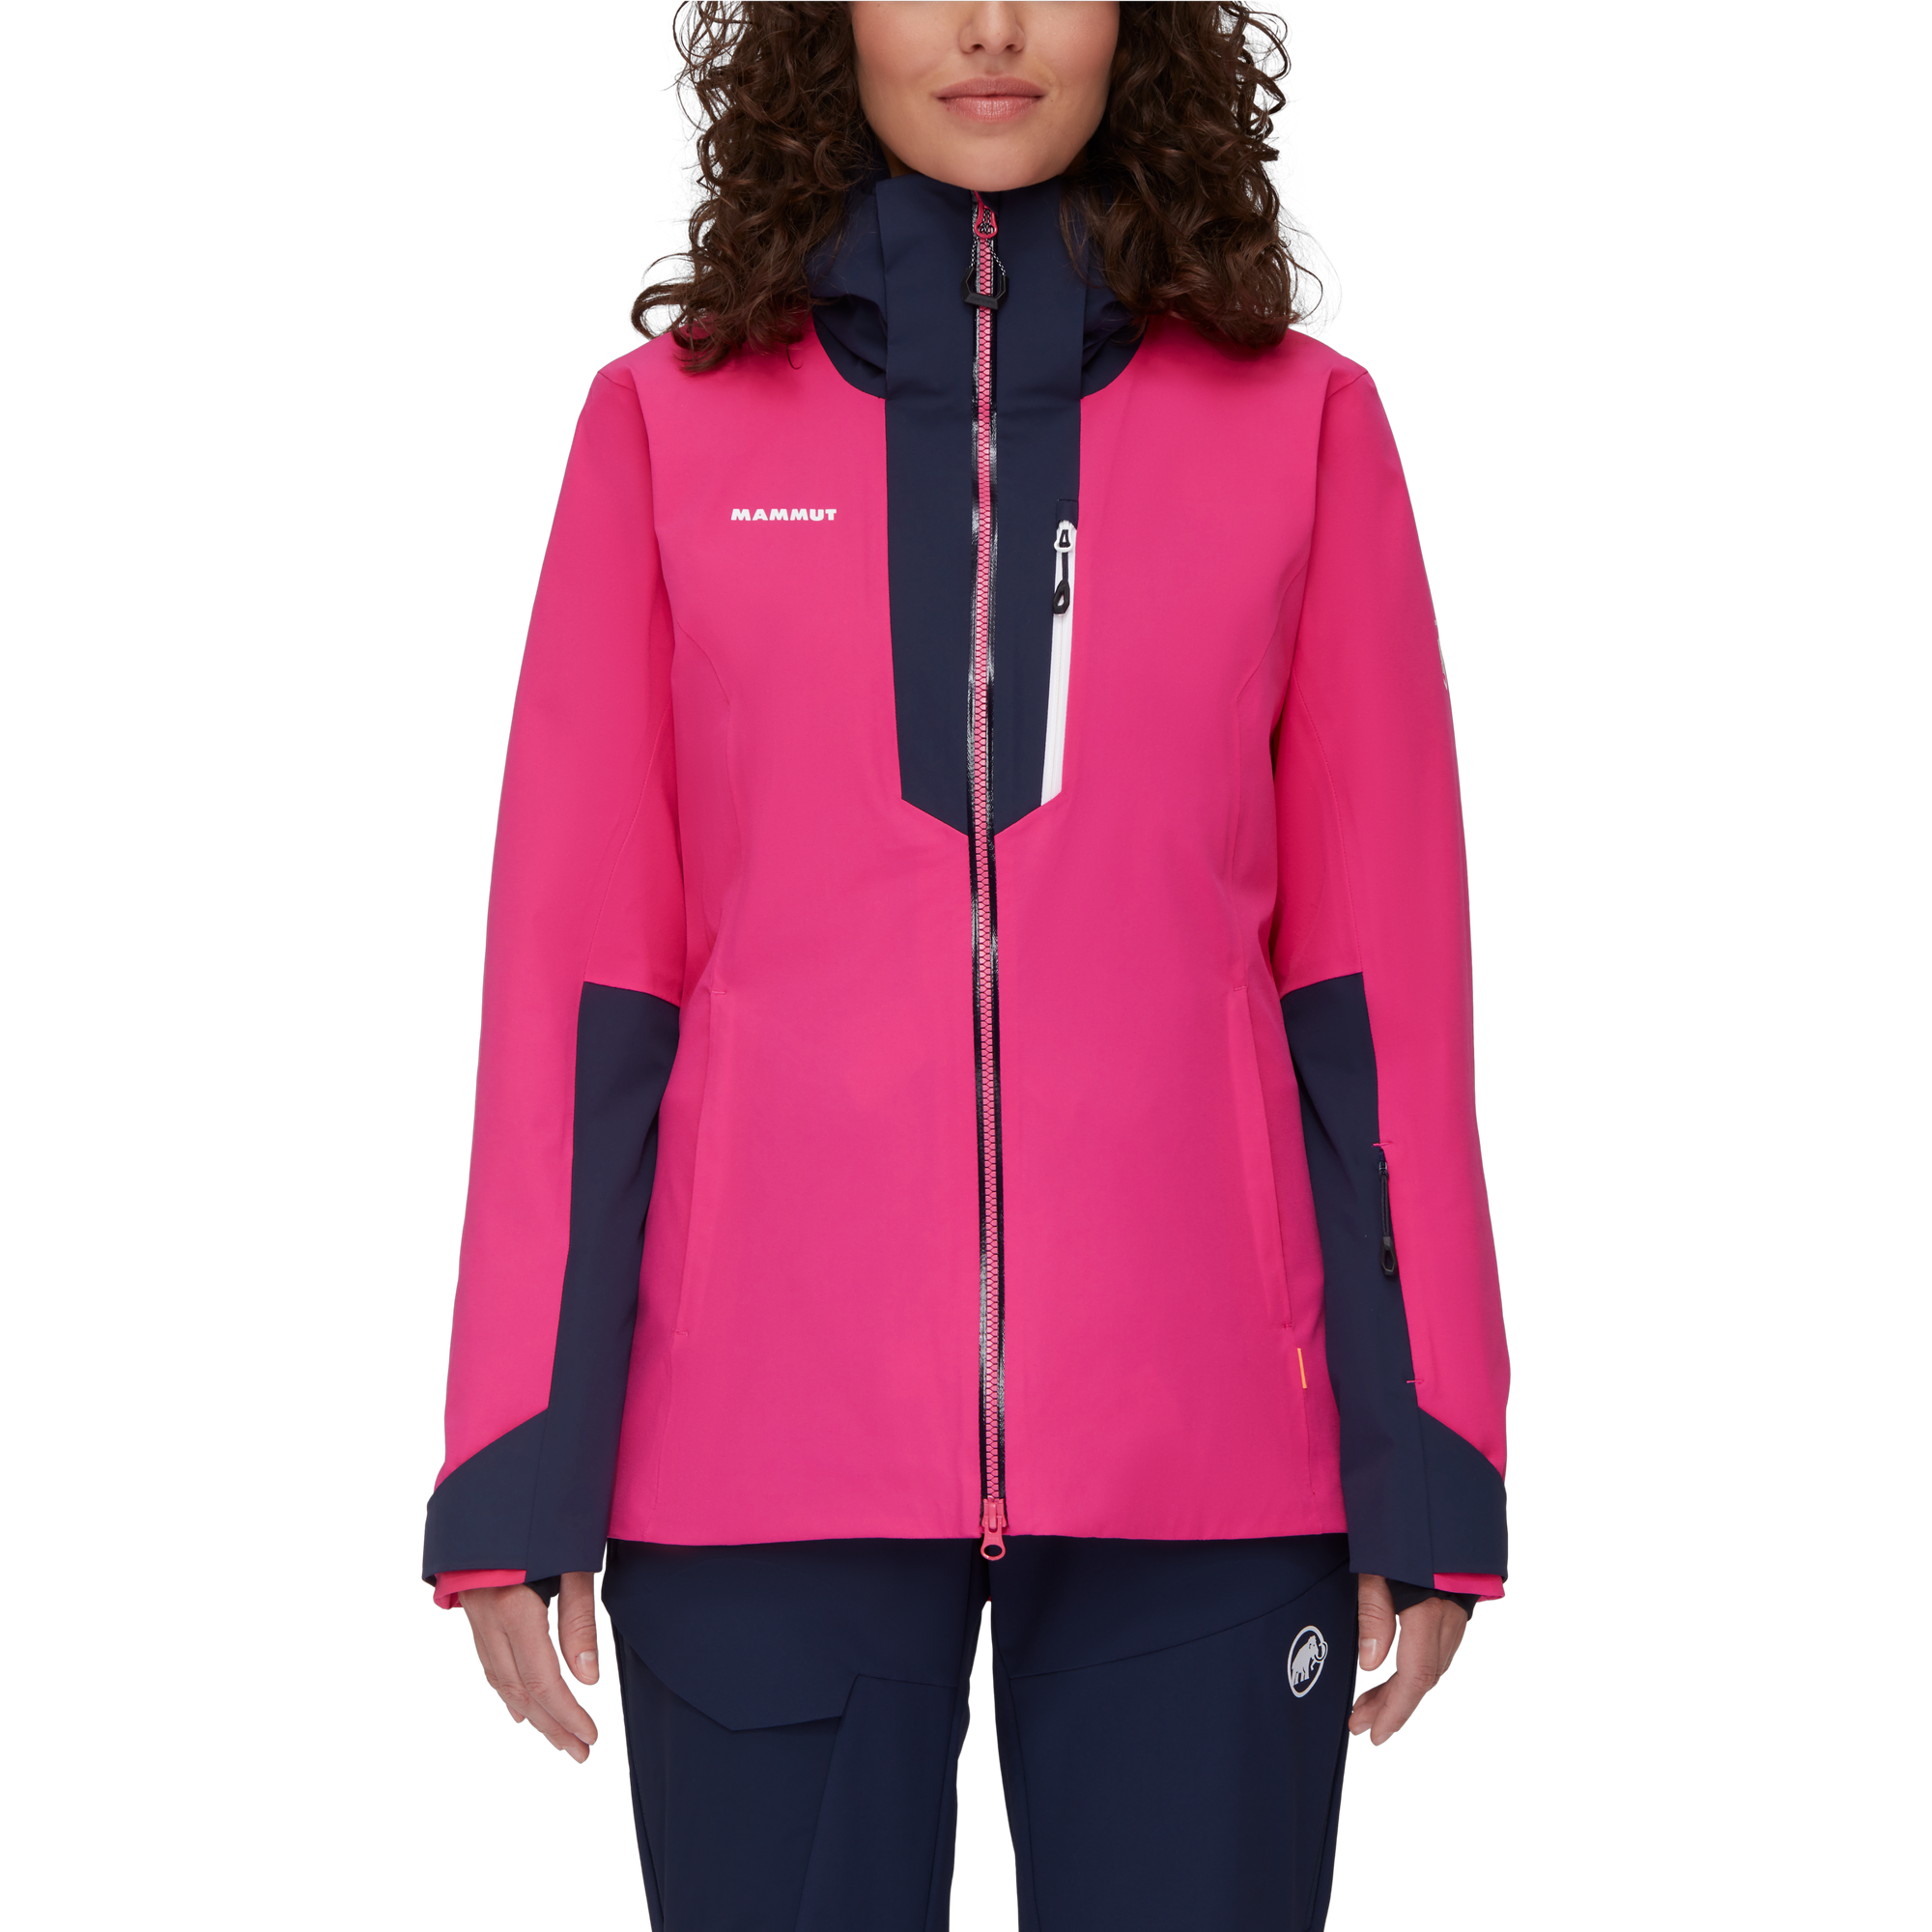 Mammut Stoney HS Thermo Jacket pink marine womens front view womens